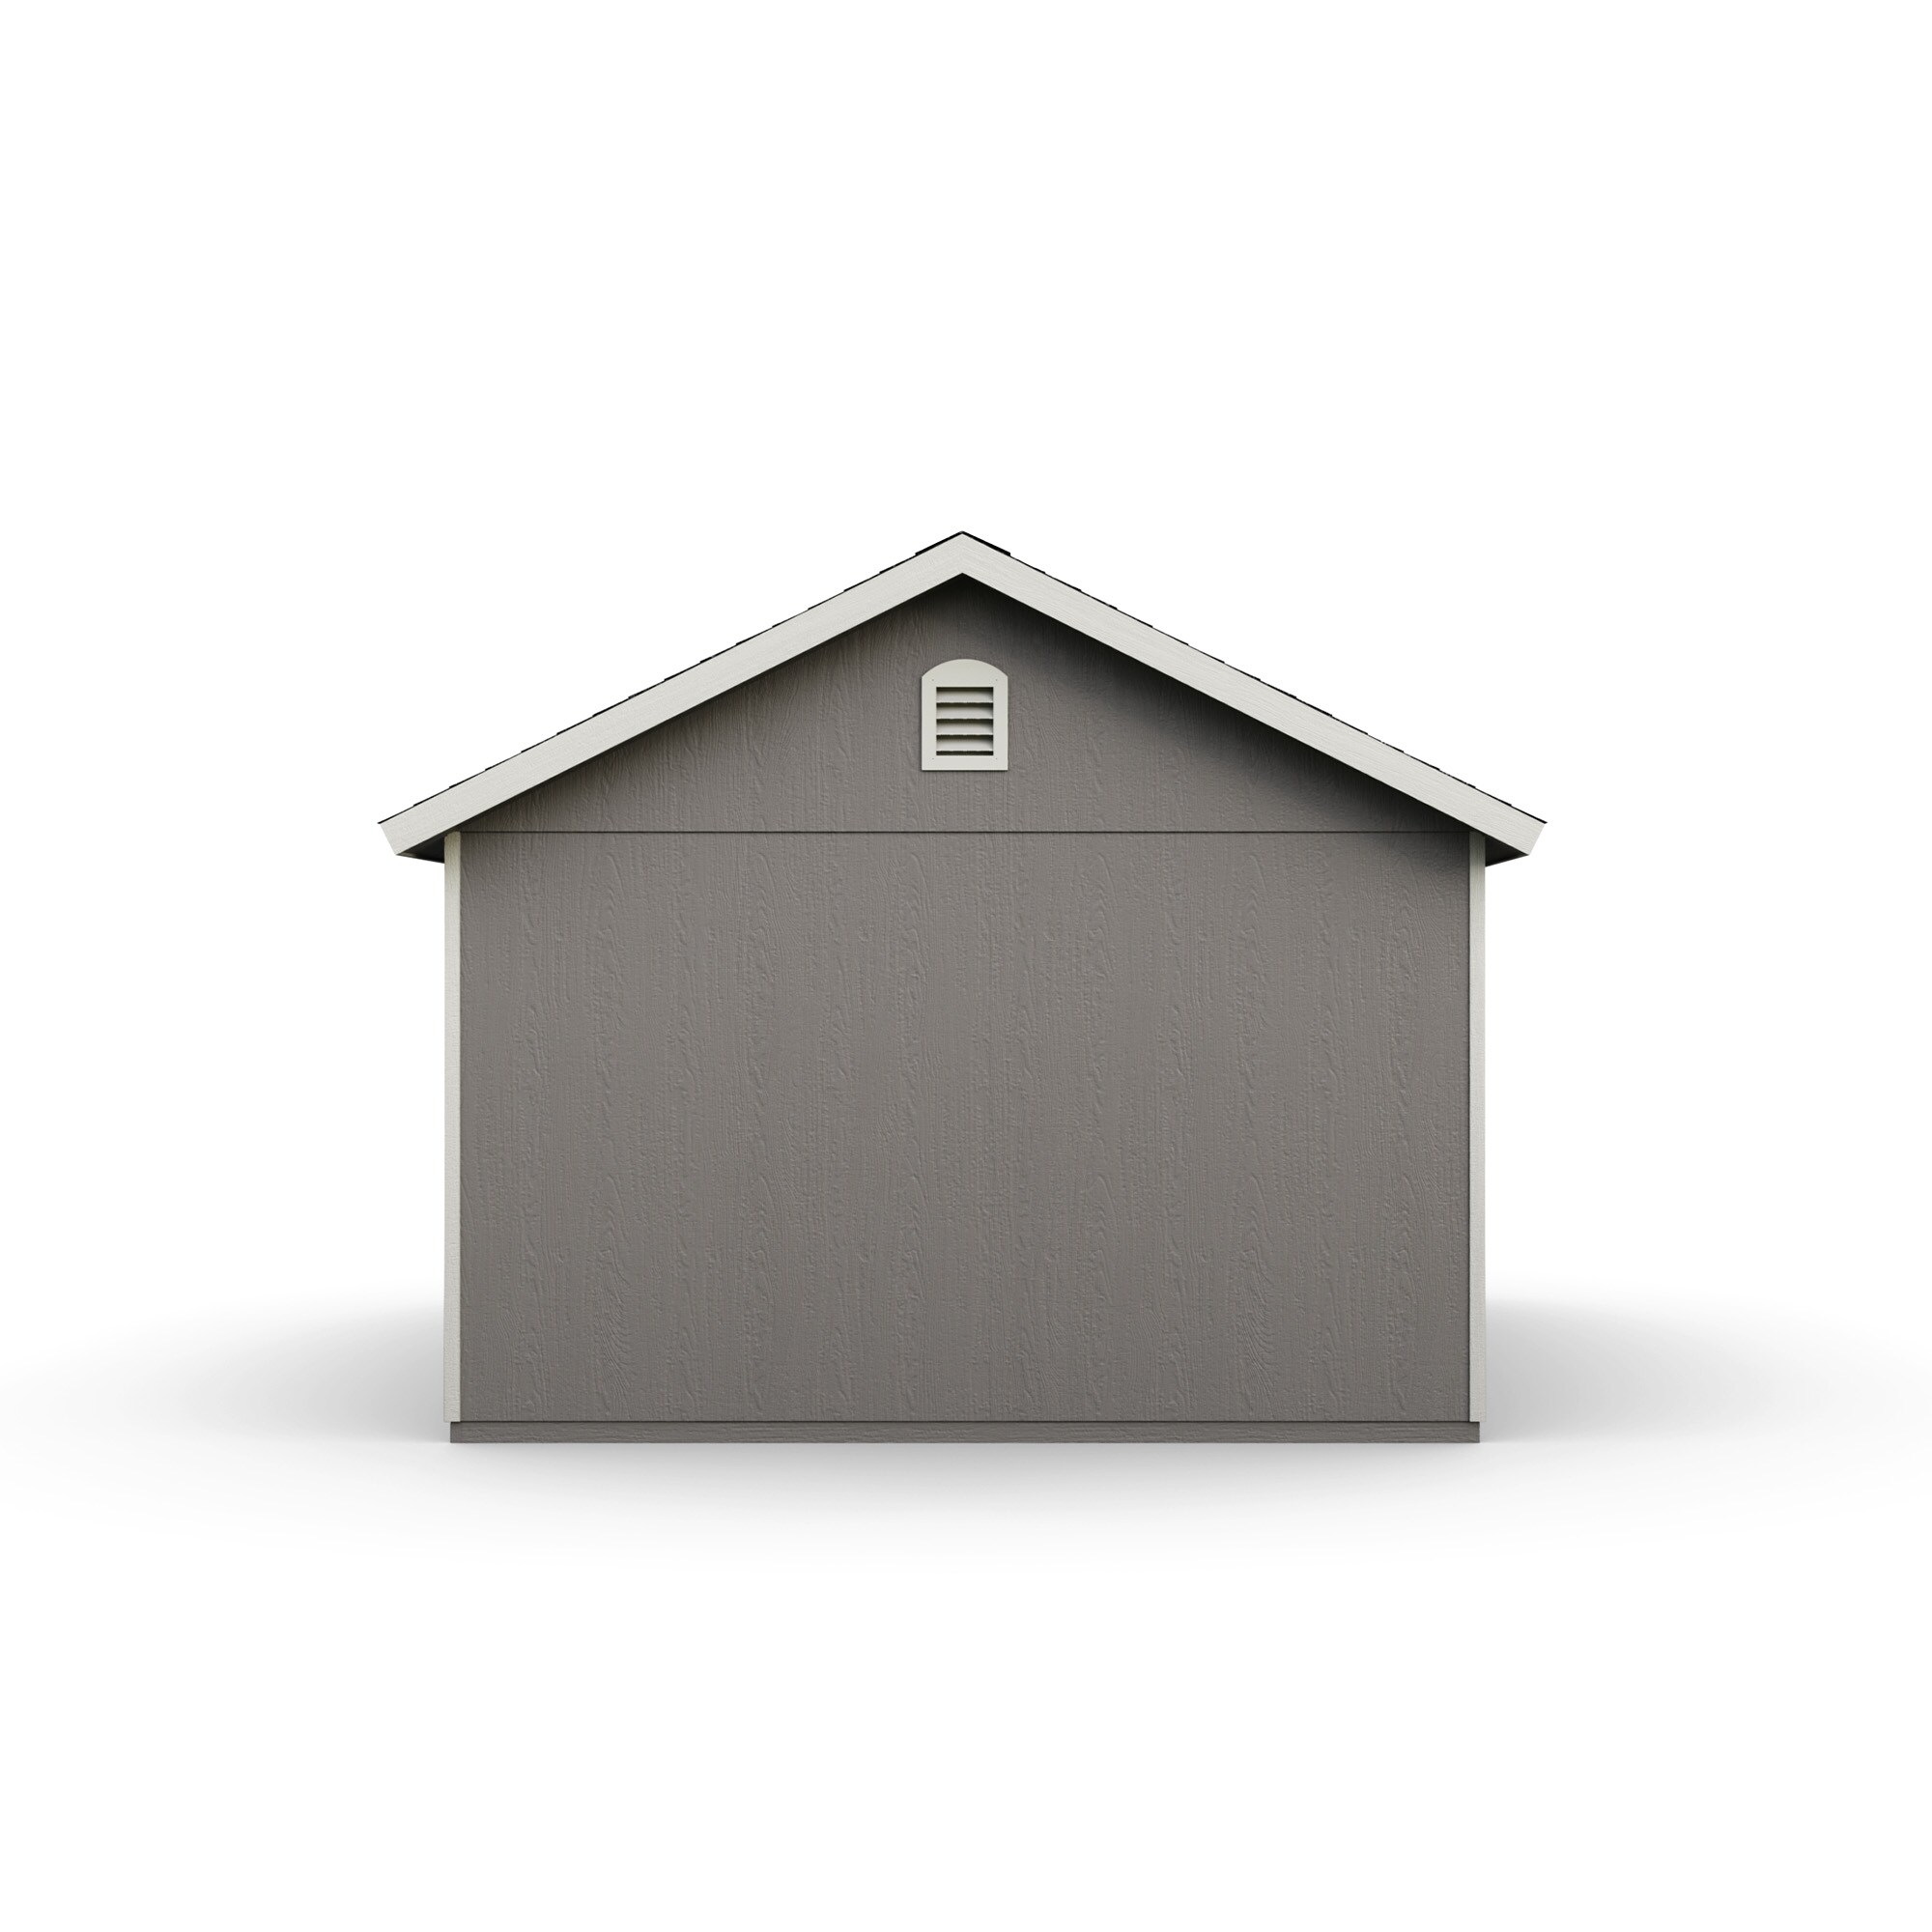 Heartland Kennedale 16-ft x 12-ft Storage Shed (Floor Included) in 